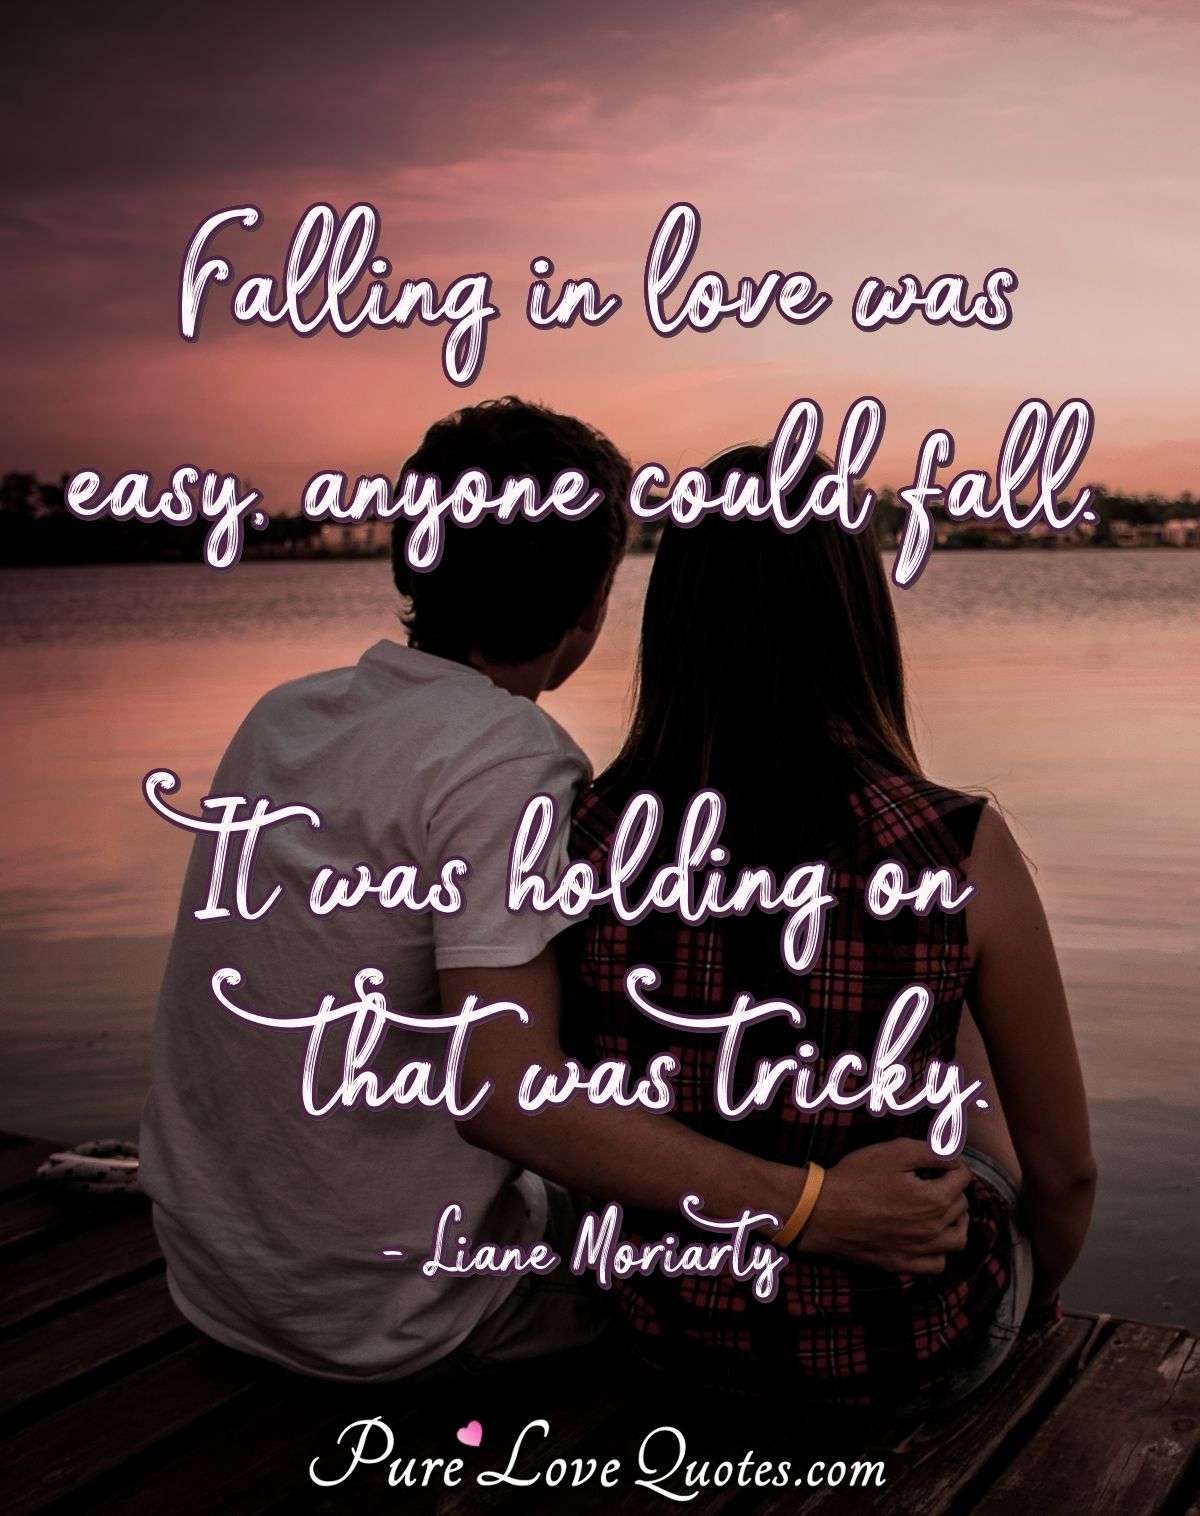 Falling in love was easy, anyone could fall. It was holding on that was tricky. - Liane Moriarty